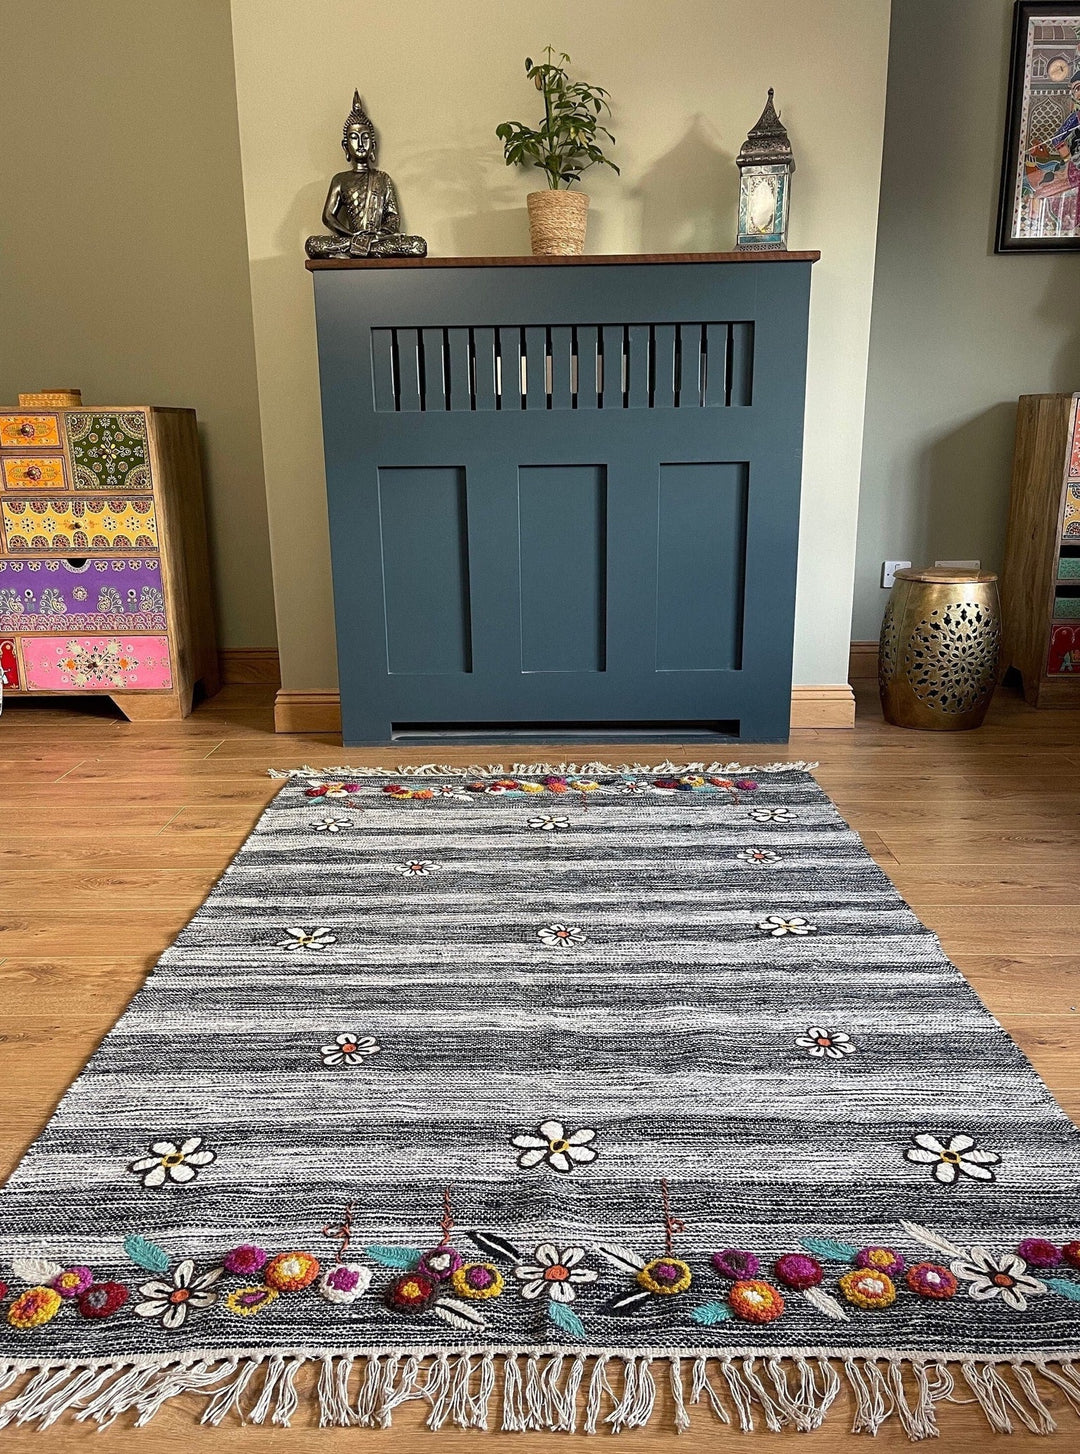 Beautiful Flower Floral Embroidered Black Grey and White Striped Wool and Cotton Rug 120 cm x 180 cm